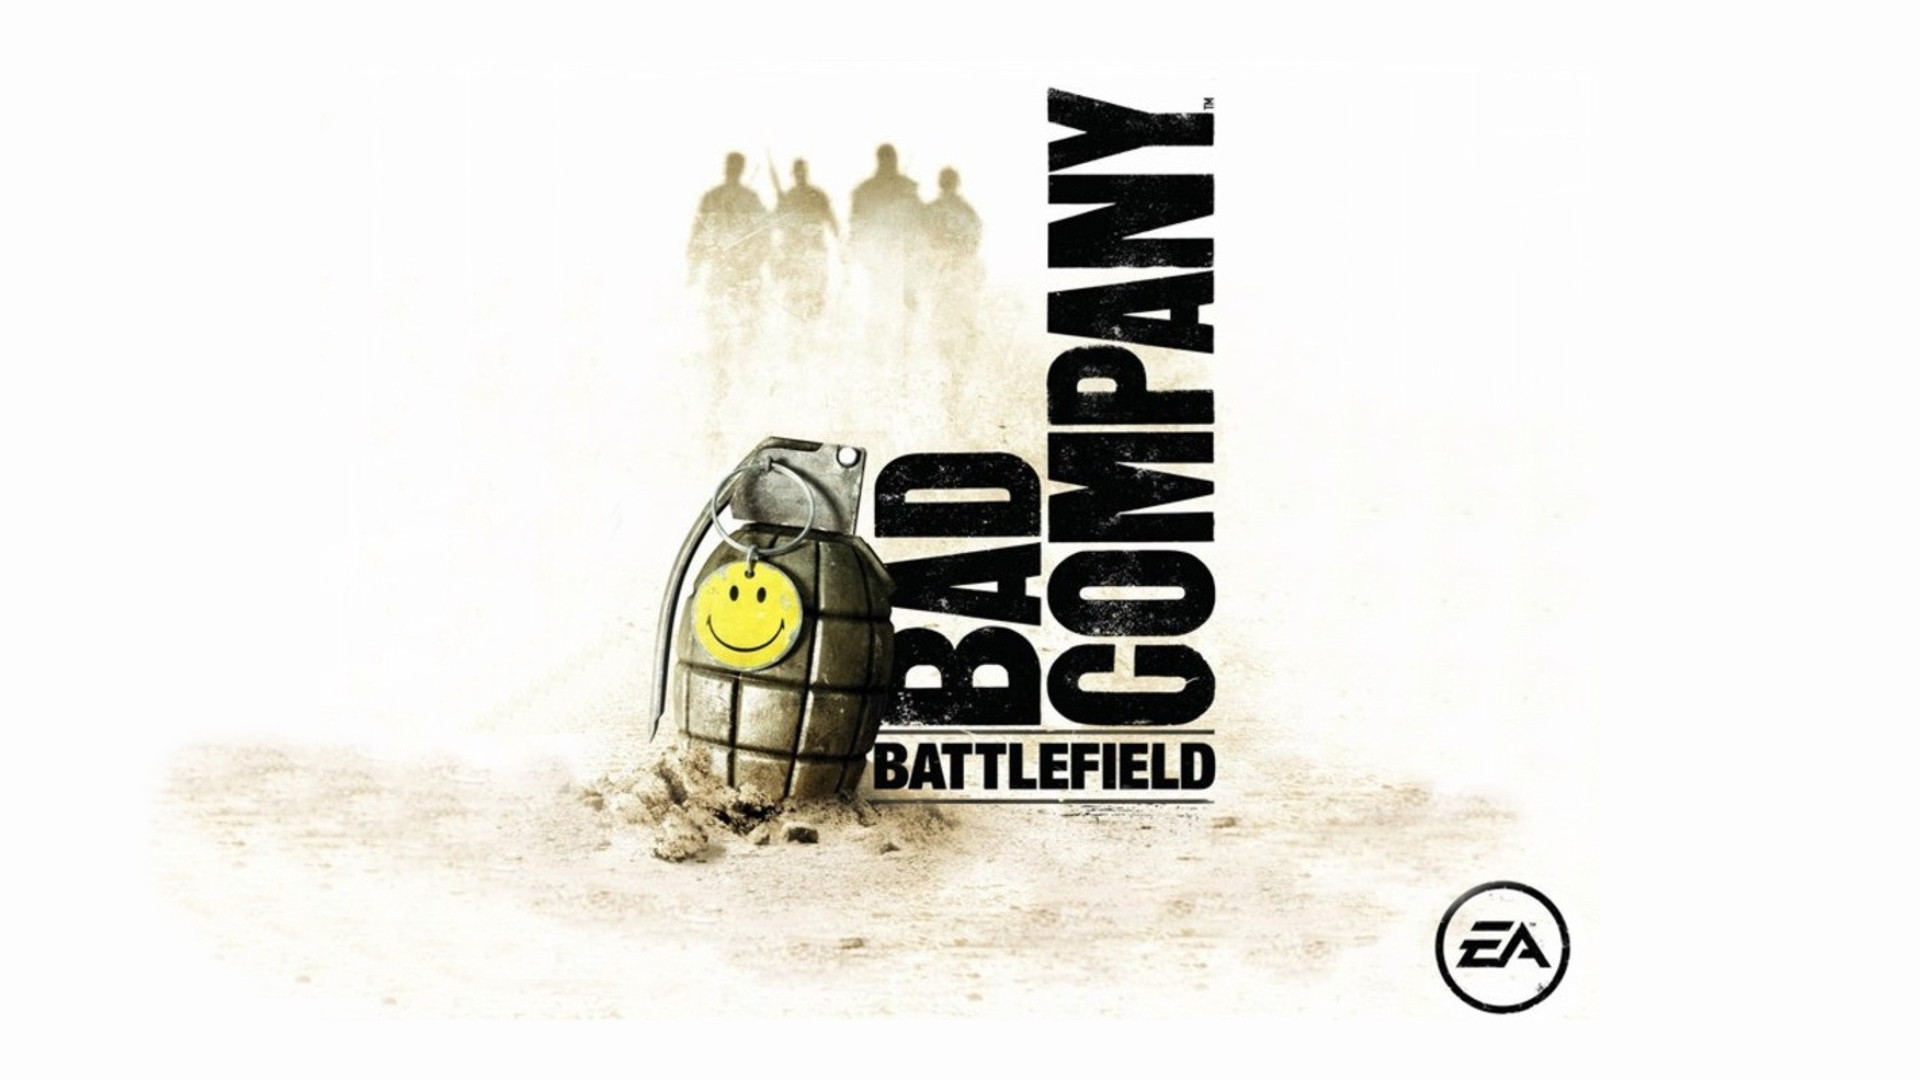 General 1920x1080 Battlefield (game) battlefield bad company (Game) grenades desert smiley logo EA DICE Electronic Arts first-person shooter video games